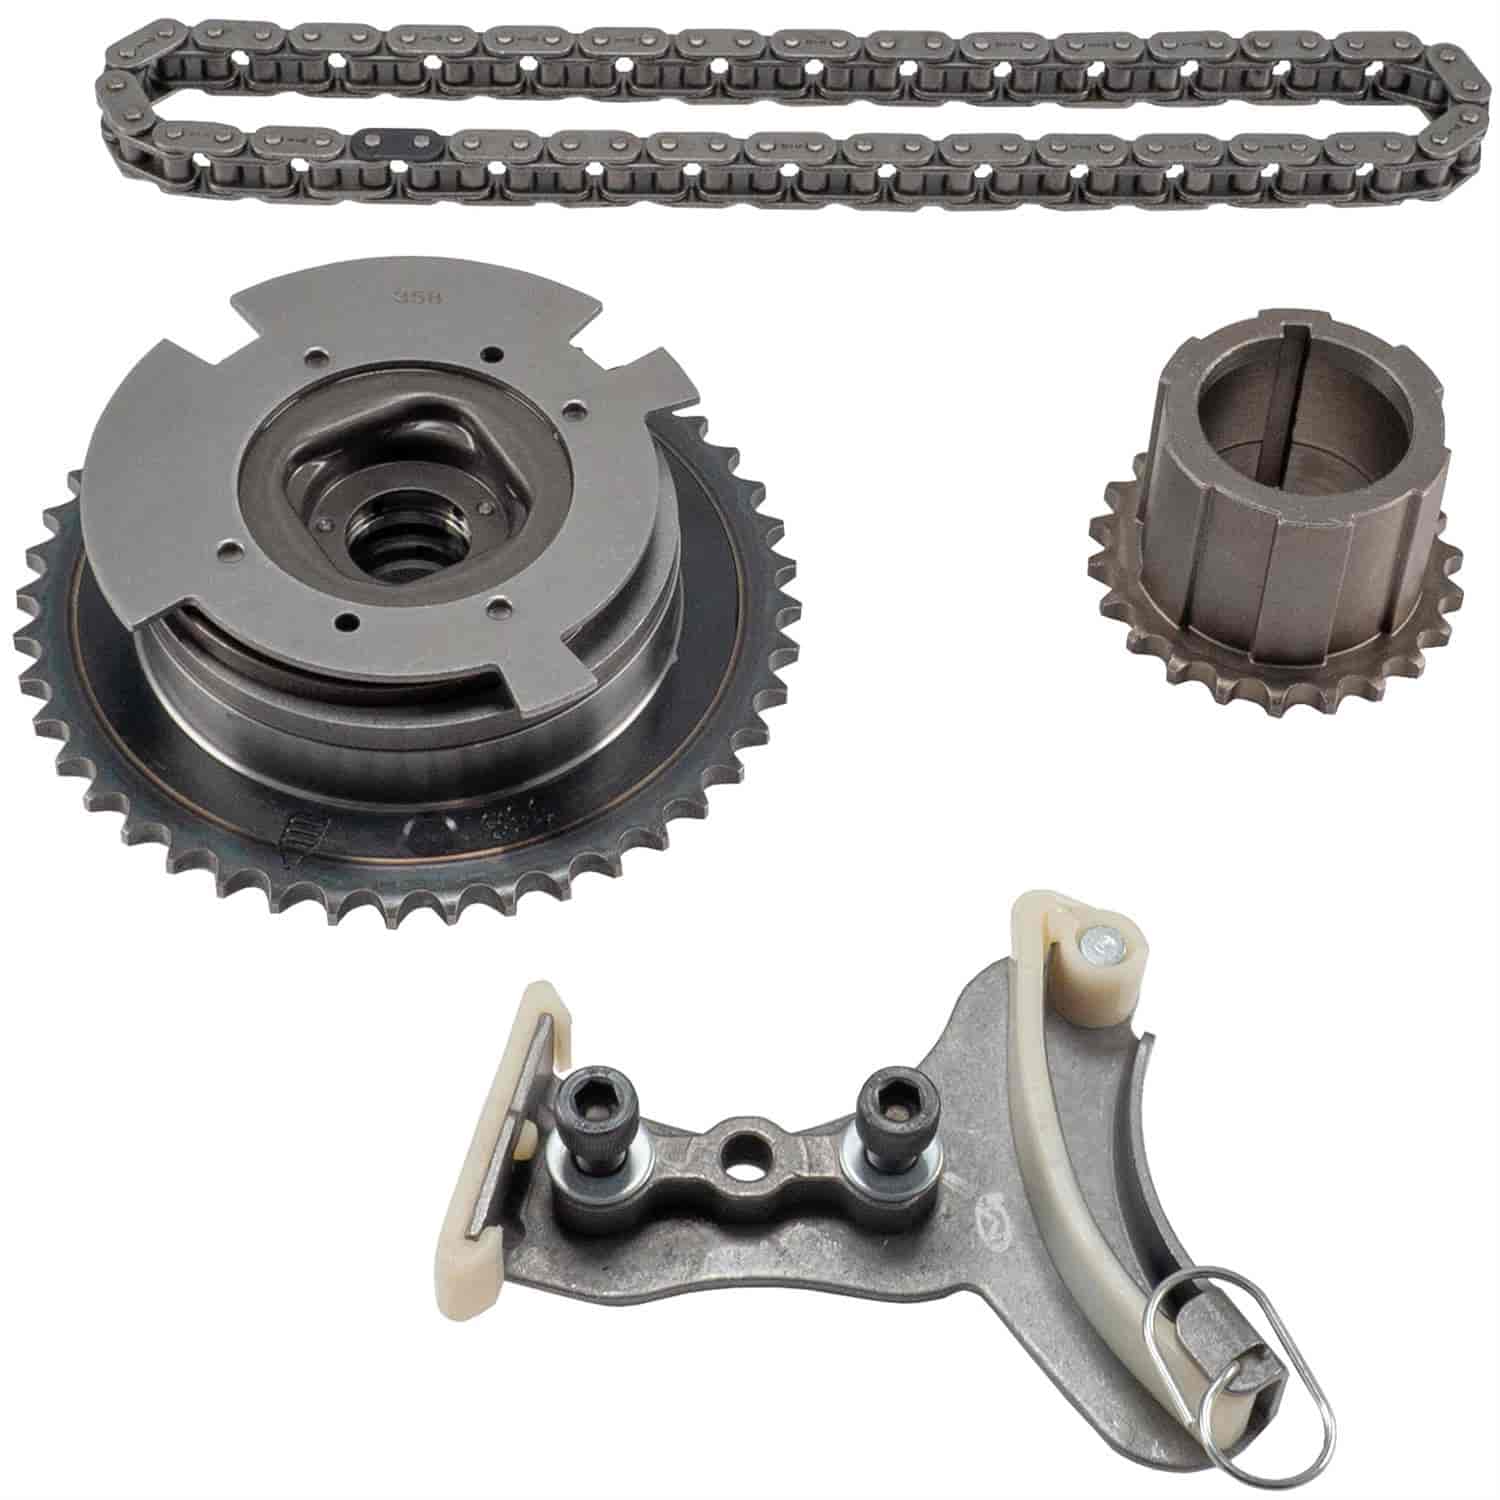 Melling 33SRH60SDHVT [3-3SRH60SDHVVT]: Engine Timing Chain Kit Fits  Select GM 4.8/5.3/6.0/6.2L Engines Includes: Camshaft VVT Actuator,  Camshaft Sprocket, Timing Chain Tensioner, Timing Chain JEGS